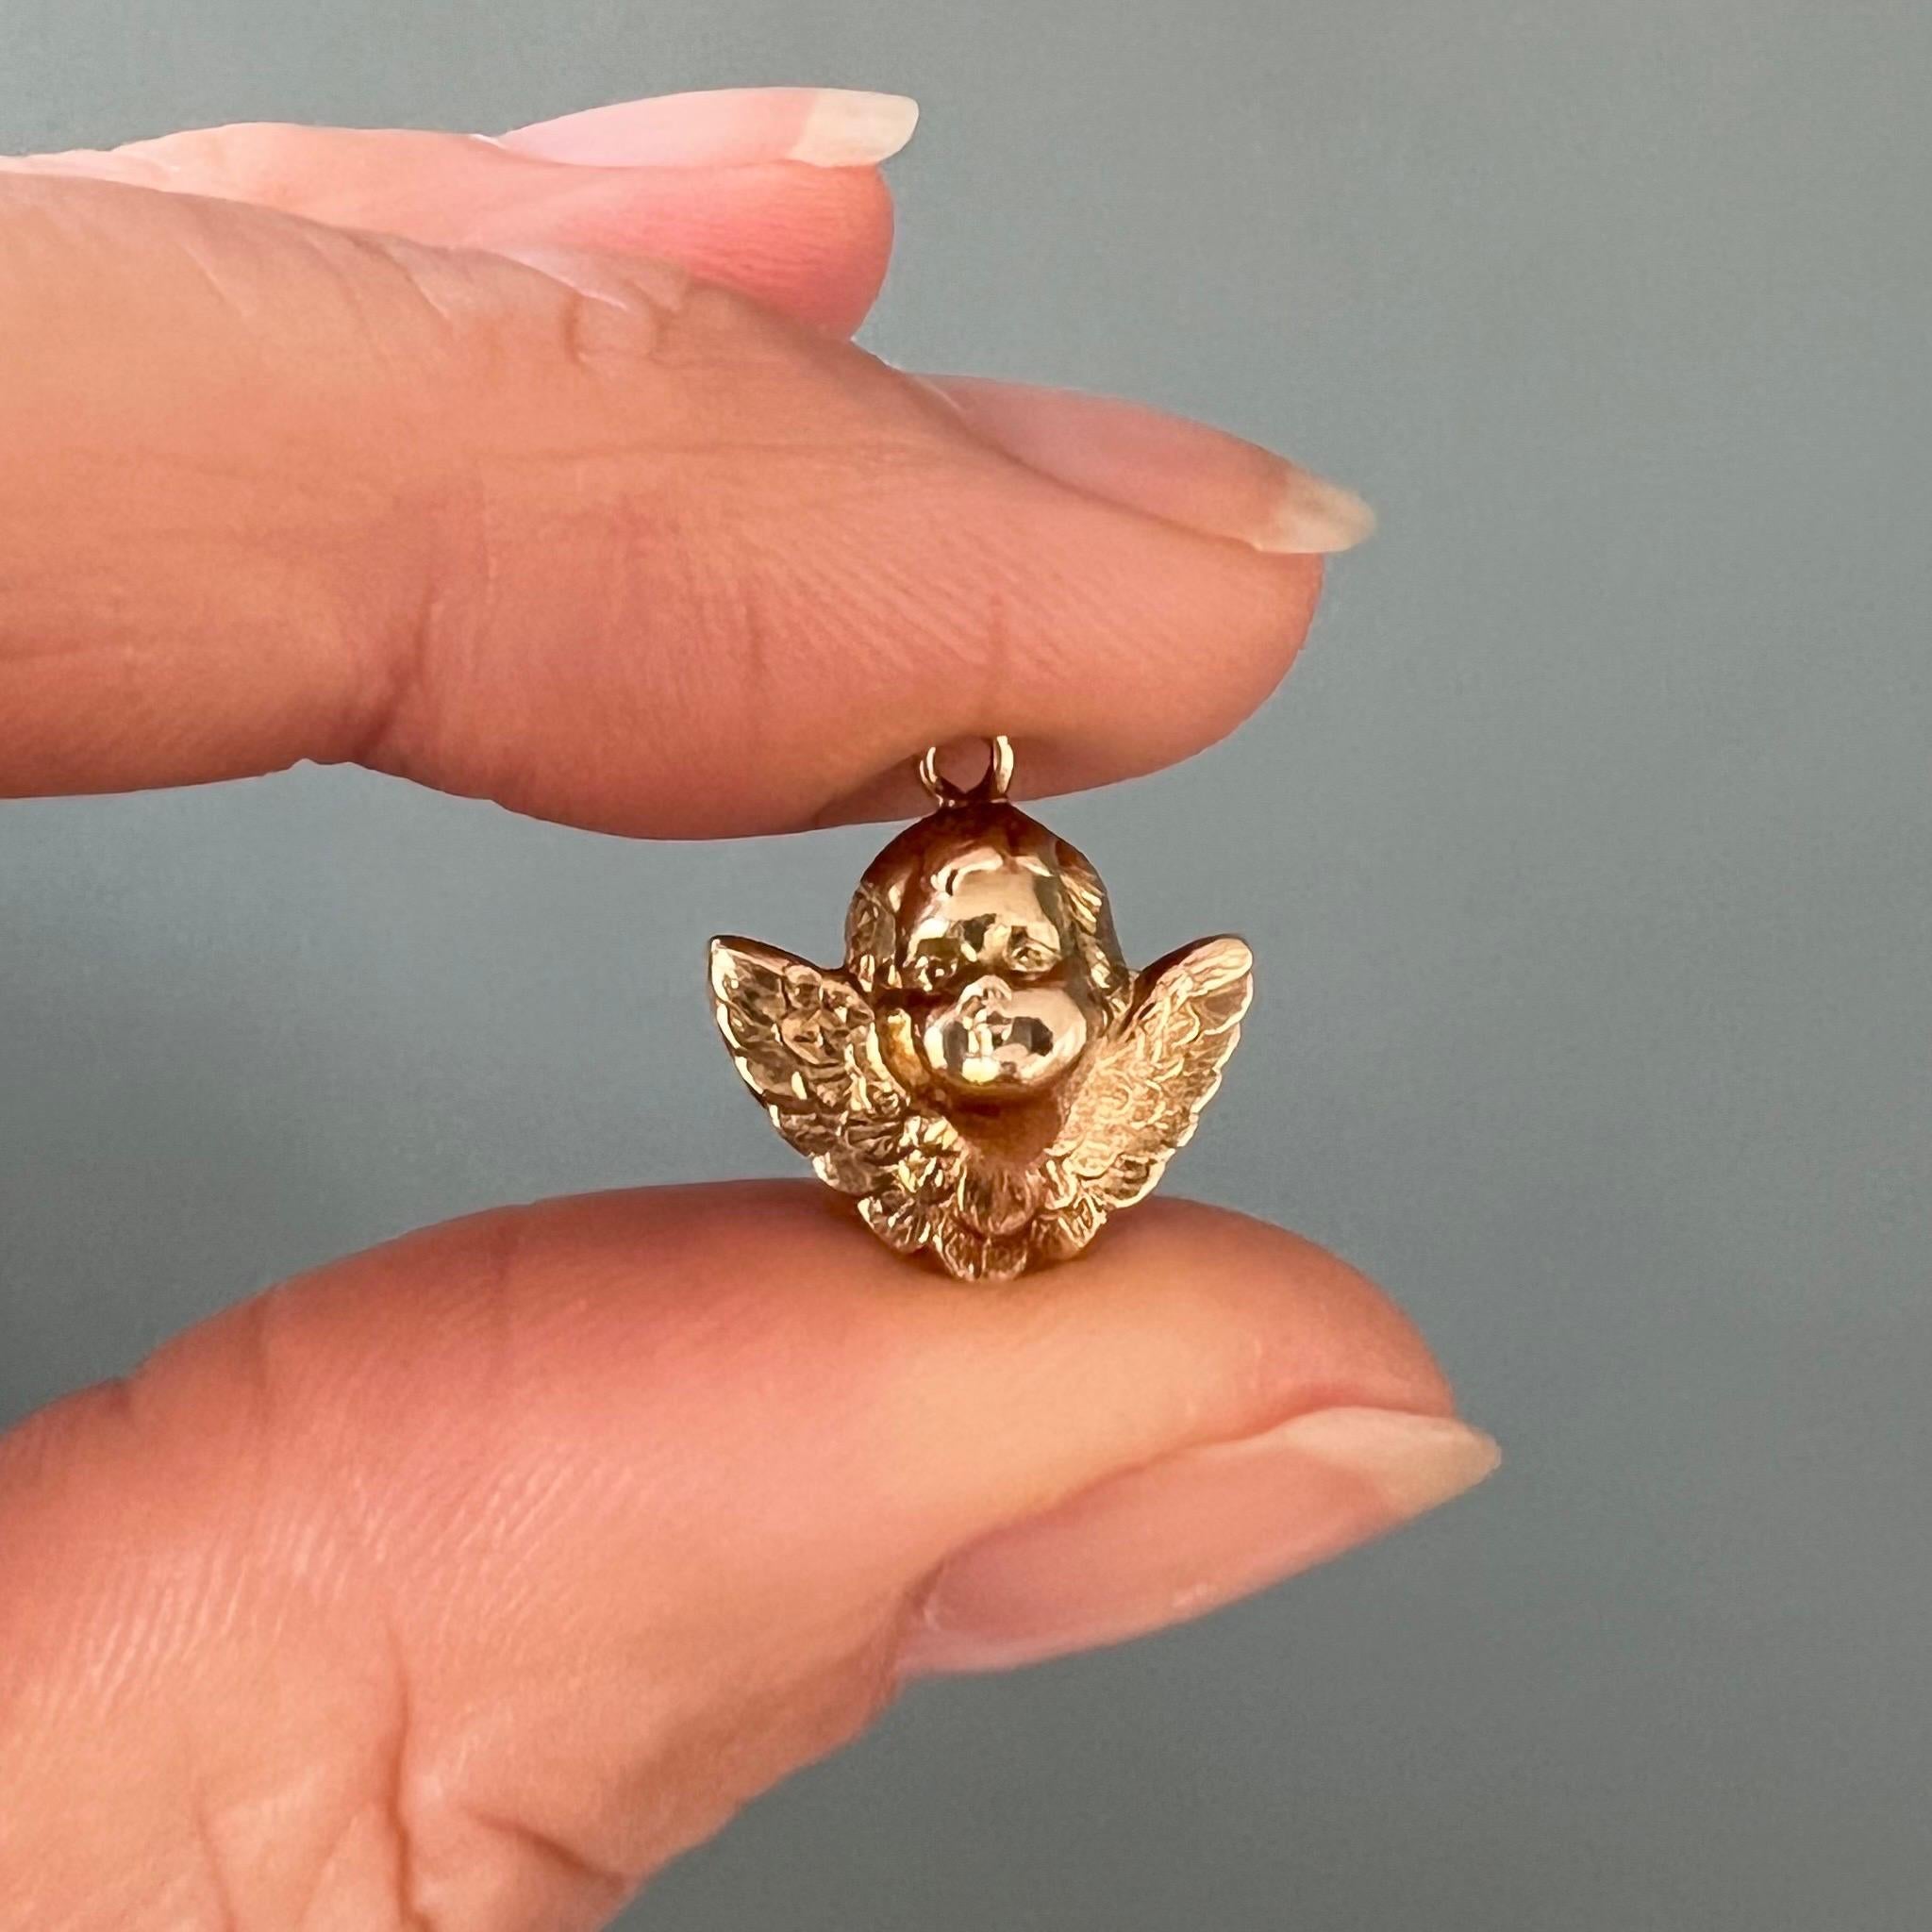 This is a vintage 14 karat yellow gold cherub charm pendant. The winged angelic being is beautifully detailed with its lovely baby angels face and finely detailed wings.

Collect your own charms as wearable memories, it has a symbolic and often a